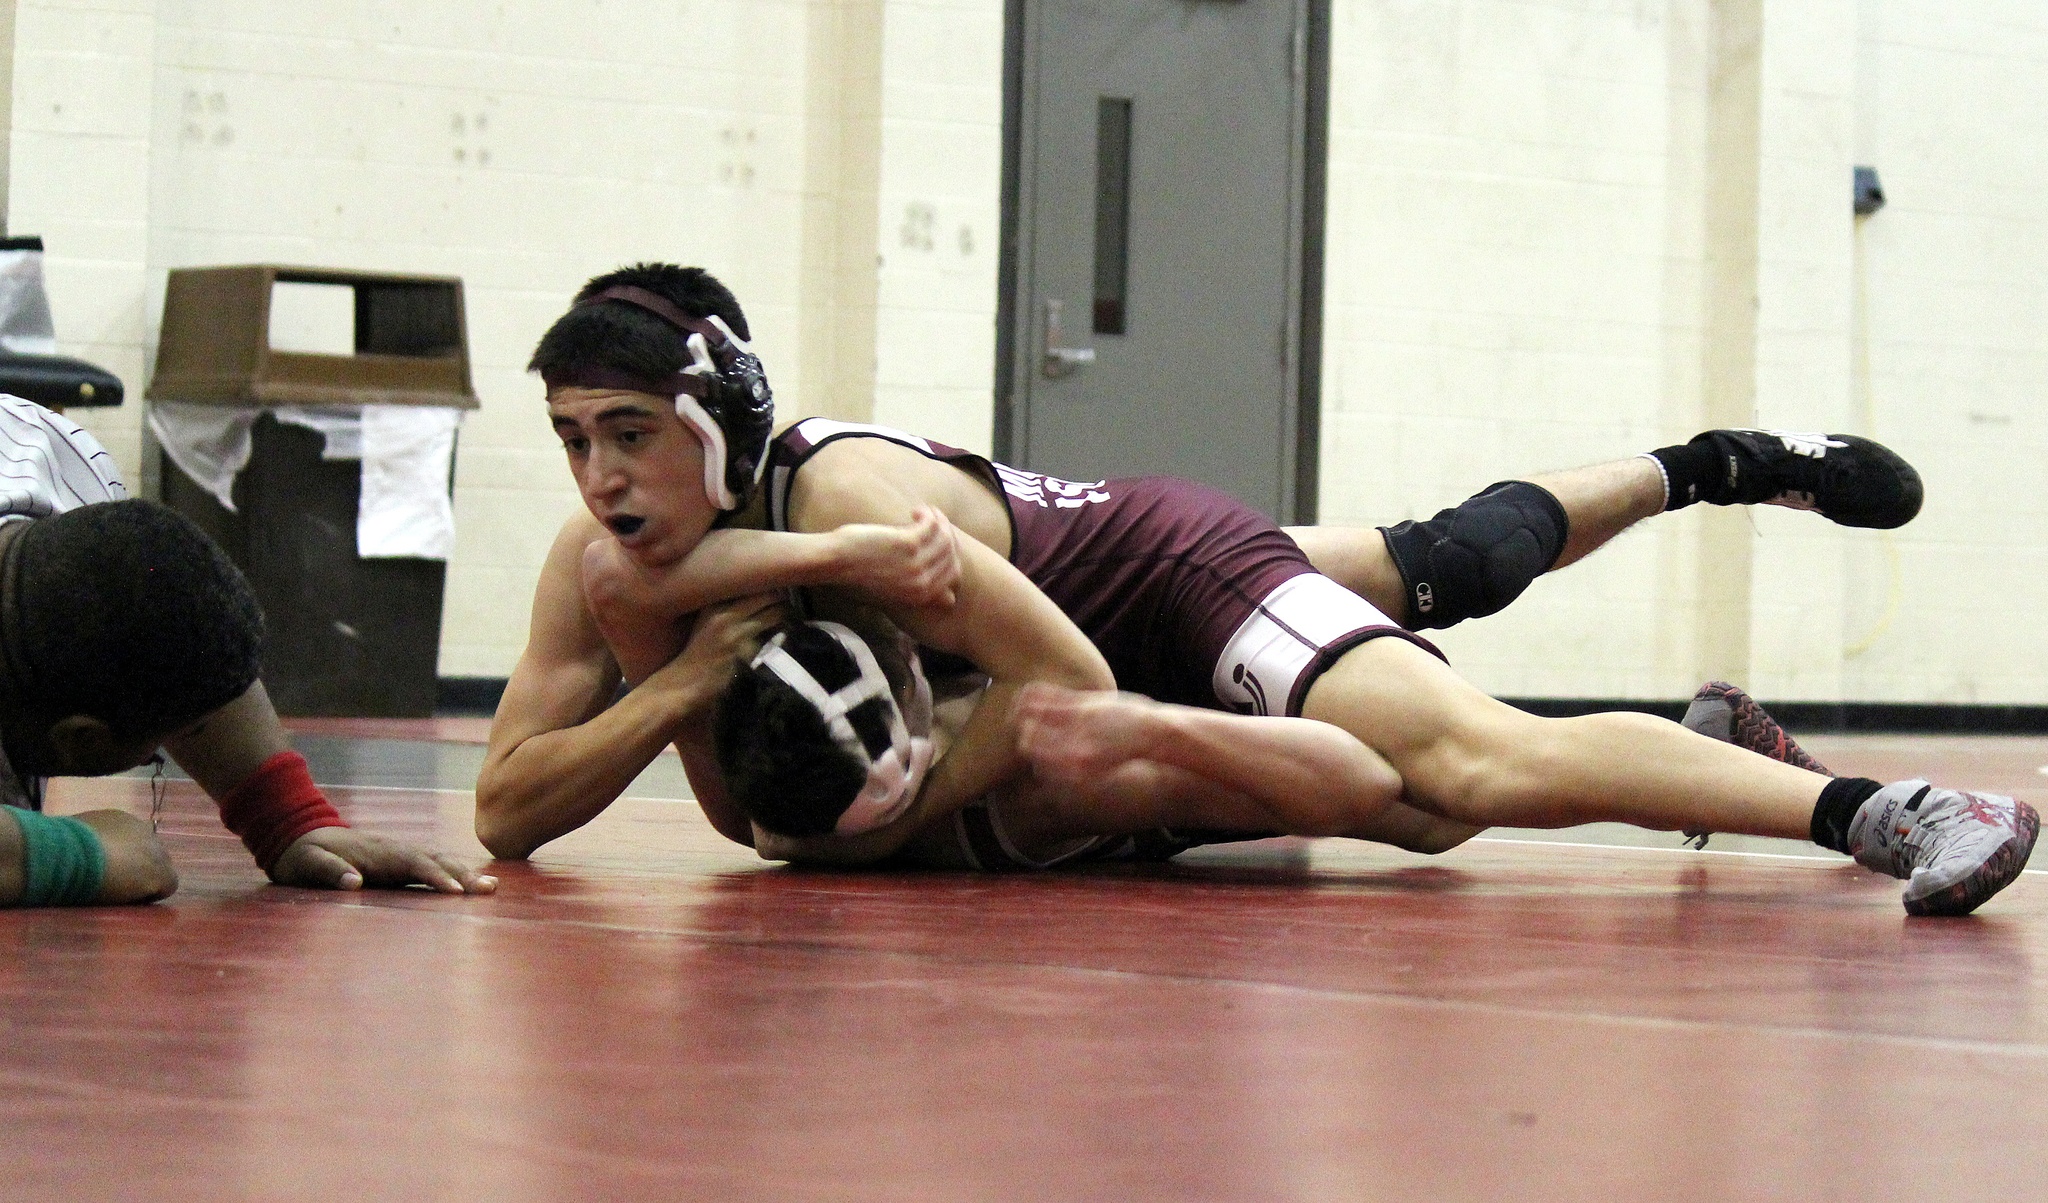 Photo courtesy of Jamie Childress                                The Mercer Island Islanders wrestling team captured two victories in a Class 3A KingCo double dual match on Jan 26. The Islanders defeated the Bellevue Wolverines 65-15 and cruised to a 52-16 win against the Juanita Rebels. Vinny Ricci (pictured) pins Juanita wrestler Nathan Ferrell on Jan. 26. In the matchup against the Wolverines, Mercer Island grapplers capturing wins via pins were Sean Cote (126), Vinny Ricci (138), Melissa Tran (145), Jonah Andrews (160), Colin Farrell (170) and Connor Hill (195). In the showdown against Juanita, Islanders’ wrestlers nabbing wins courtesy of pins consisted of Ricci (138), Finn Childress (152) and Teague Frazier (220).